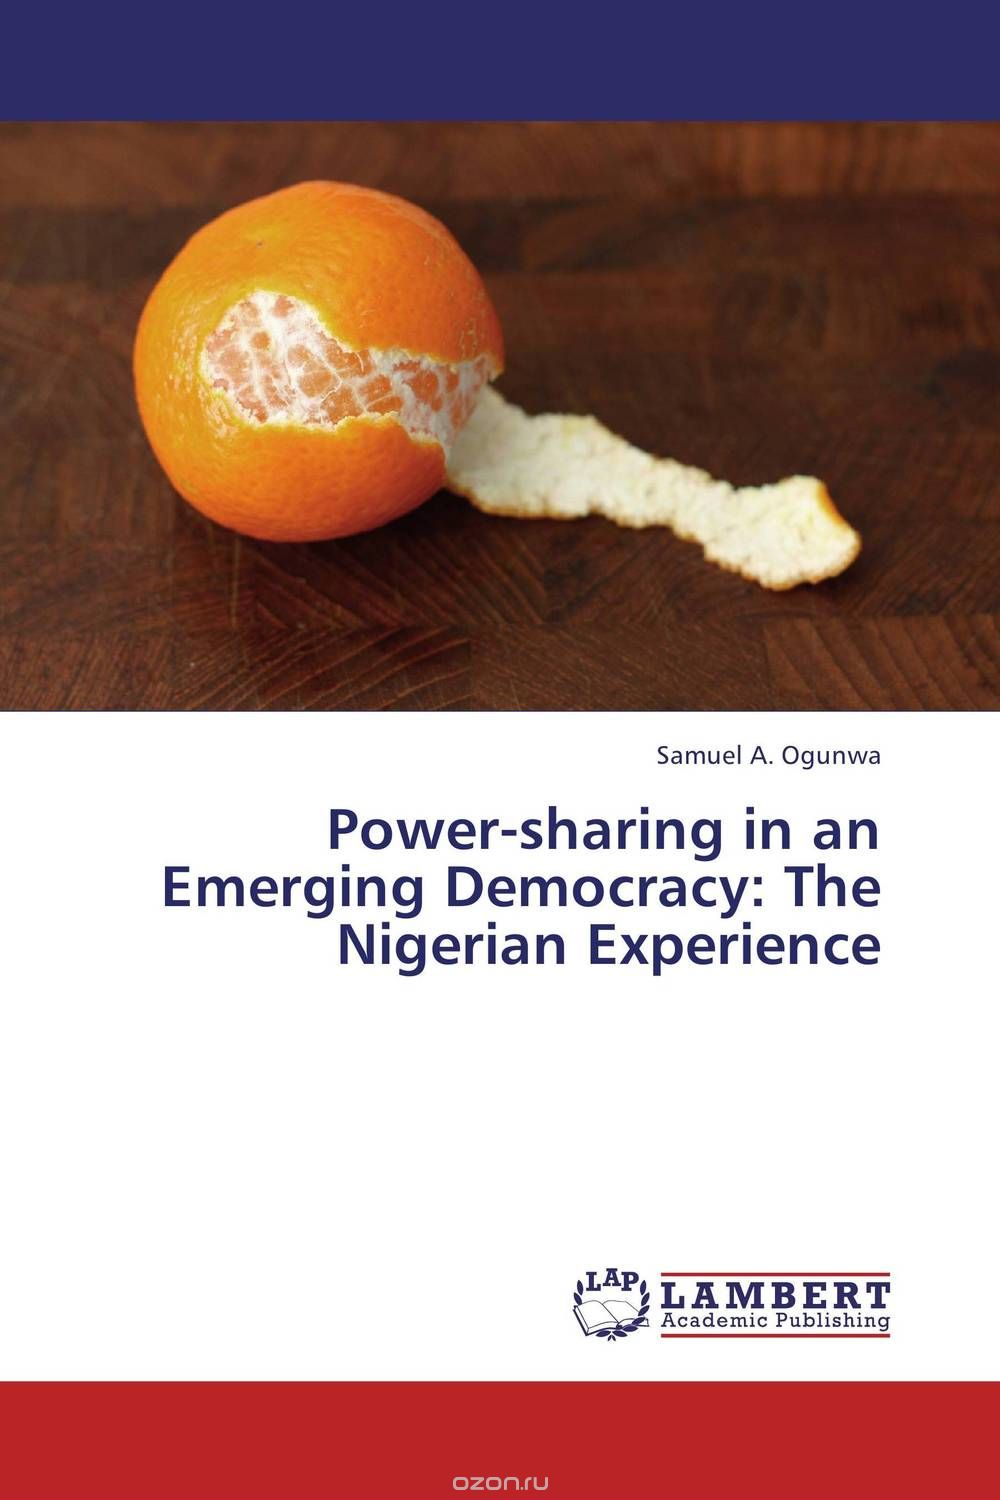 Power-sharing in an Emerging Democracy: The Nigerian Experience